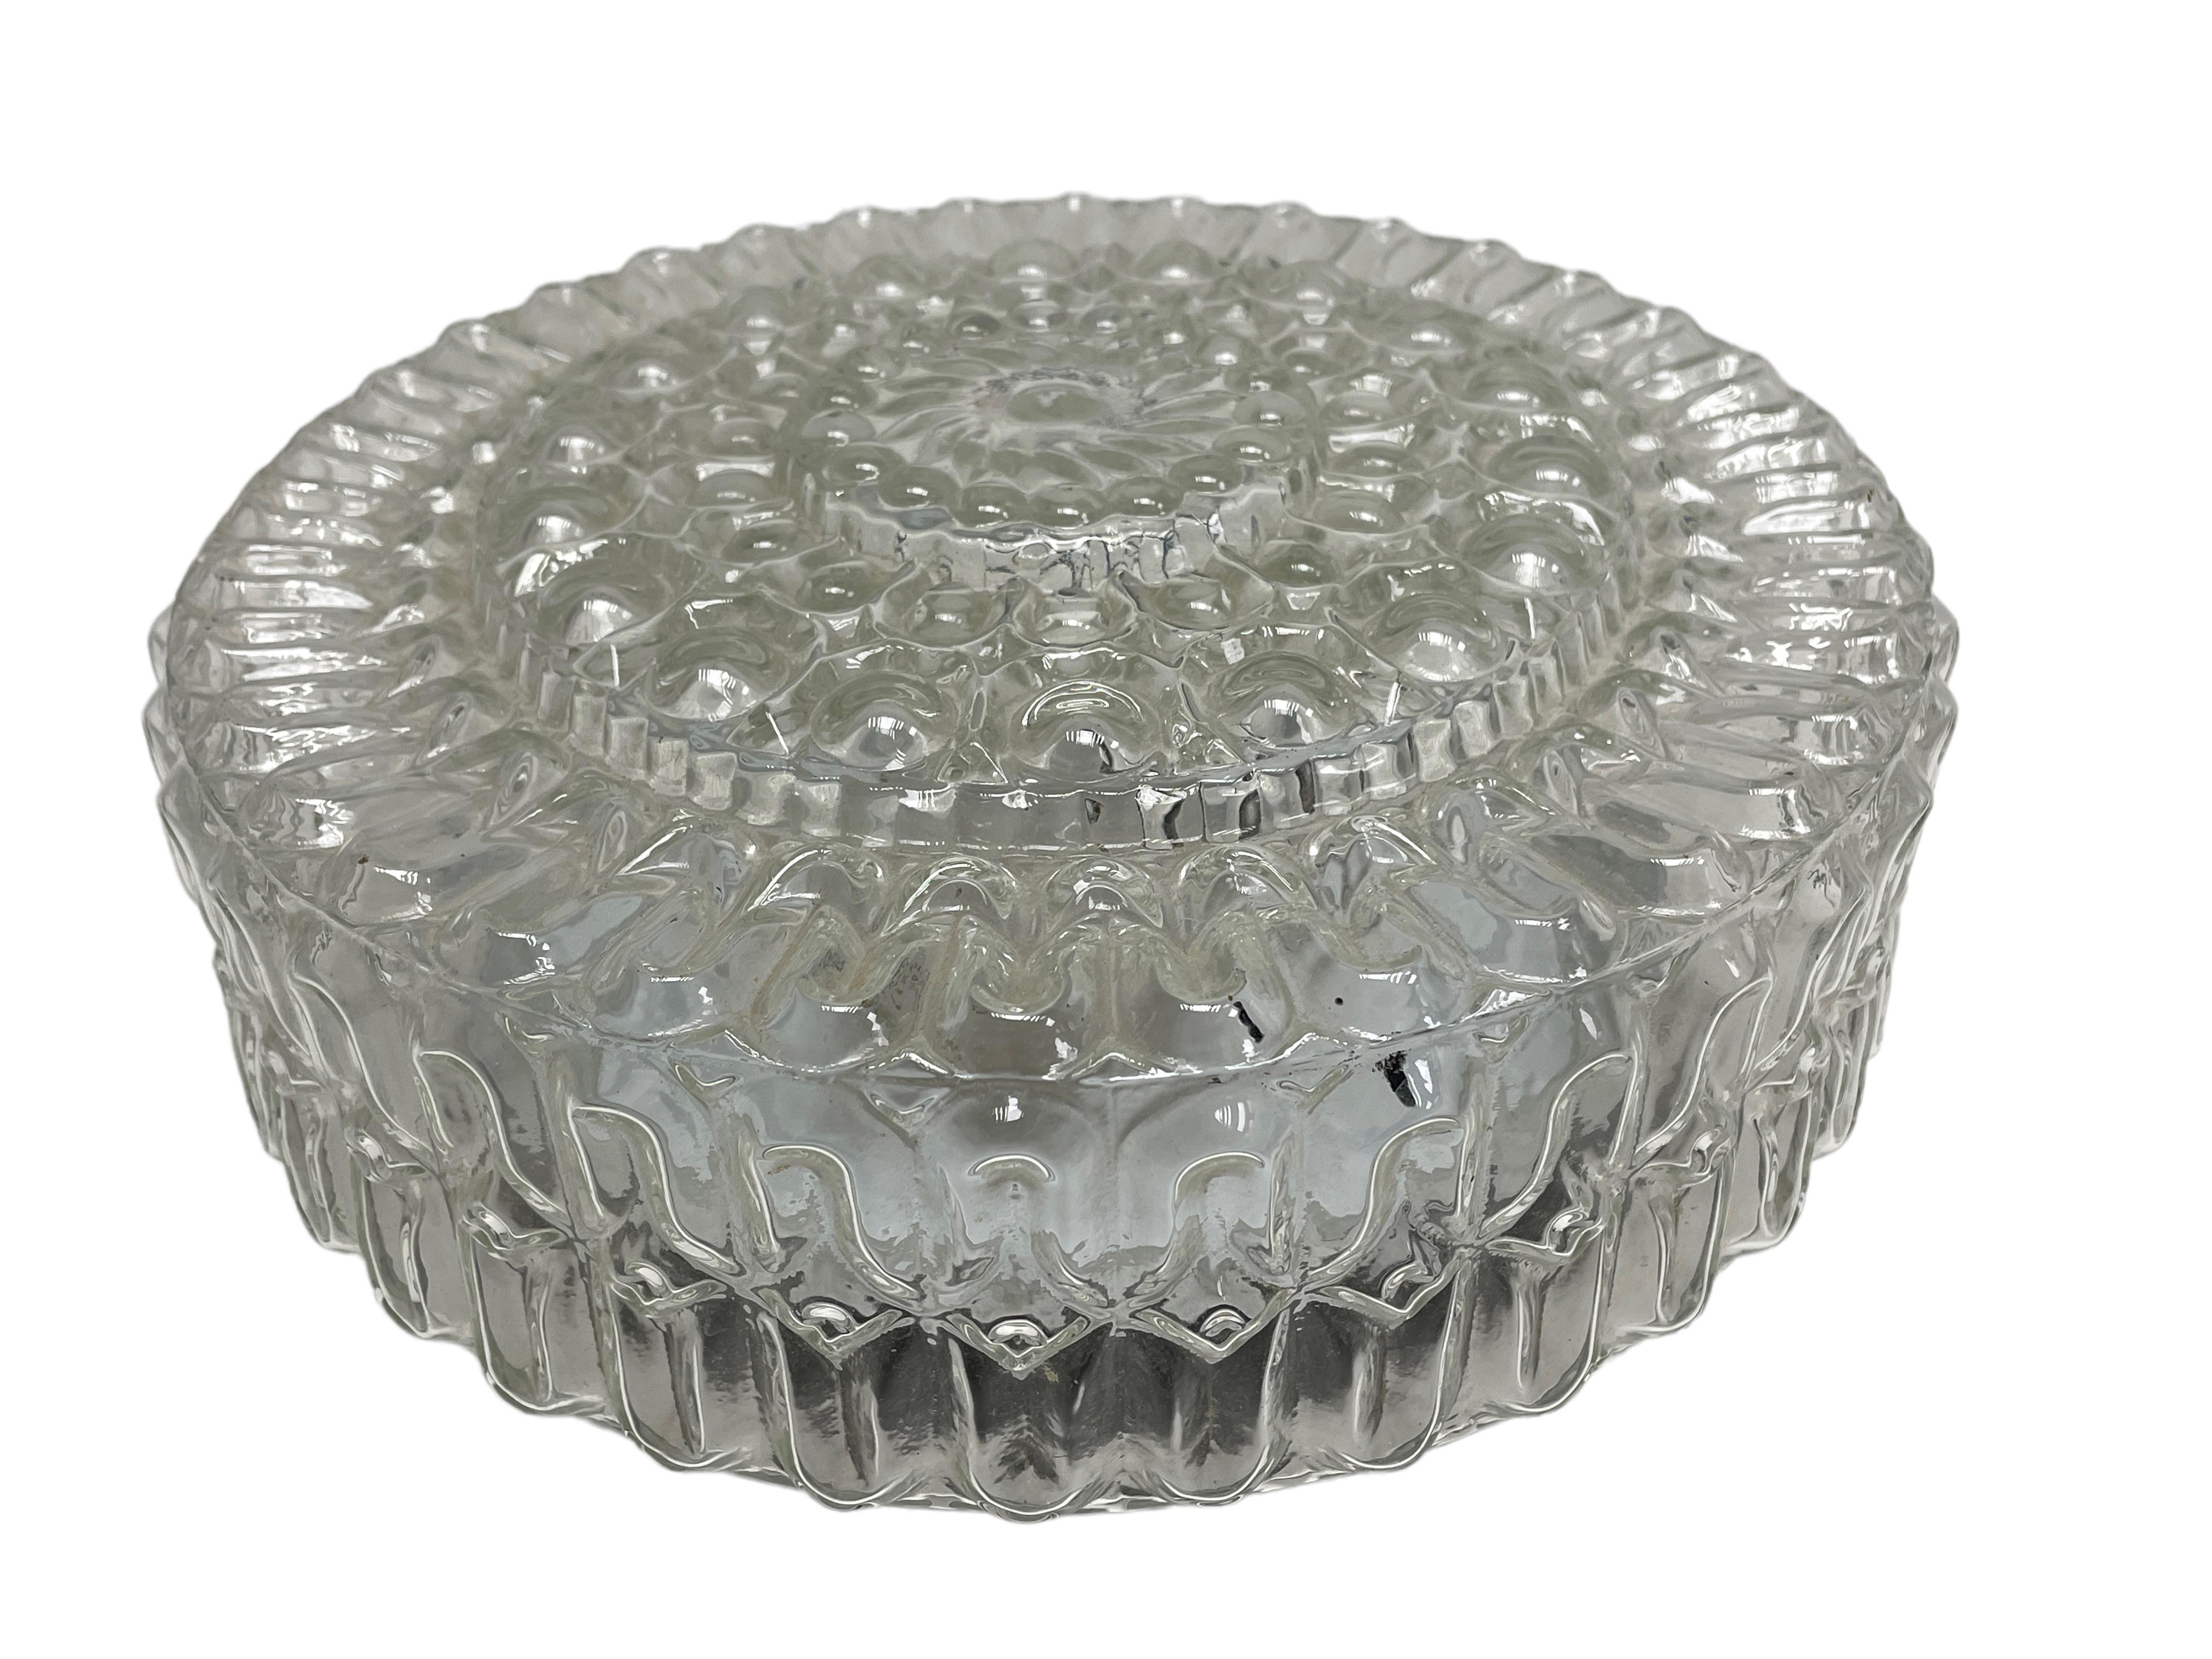 Beautiful bubble glass pattern flush mount. Made in Germany, Massive Leuchten. Gorgeous textured glass flush mount with metal fixture. The fixture requires one European E27 Edison or Medium bulb up to 60 watts. A nice addition to any room.